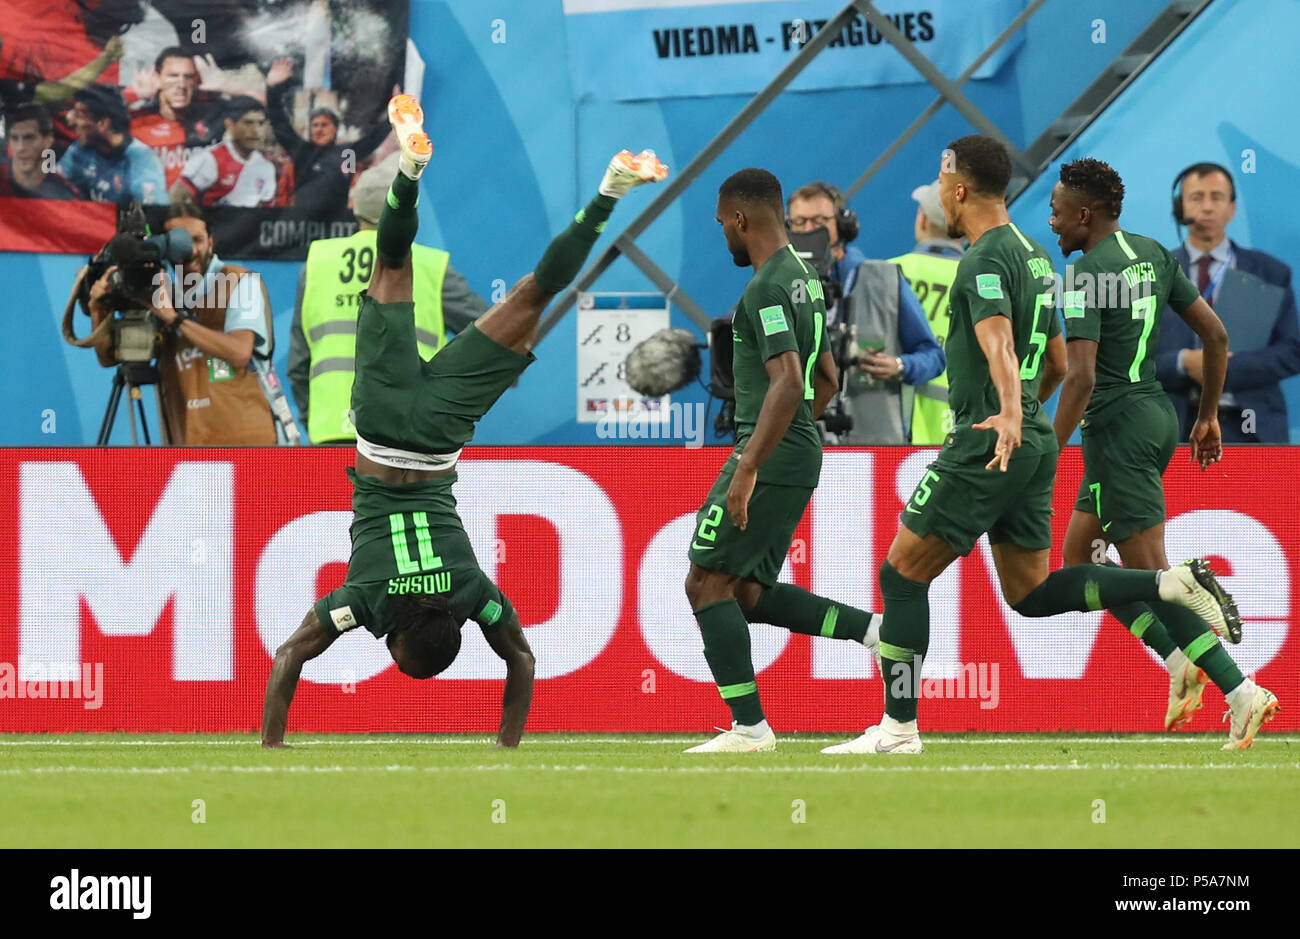 Saint Petersburg, Russia. 26th June, 2018. Victor Moses (1st L) of Nigeria celebrates scoring during the 2018 FIFA World Cup Group D match between Nigeria and Argentina in Saint Petersburg, Russia, June 26, 2018. Argentina won 2-1 and advanced to the round of 16. Credit: Wu Zhuang/Xinhua/Alamy Live News Stock Photo